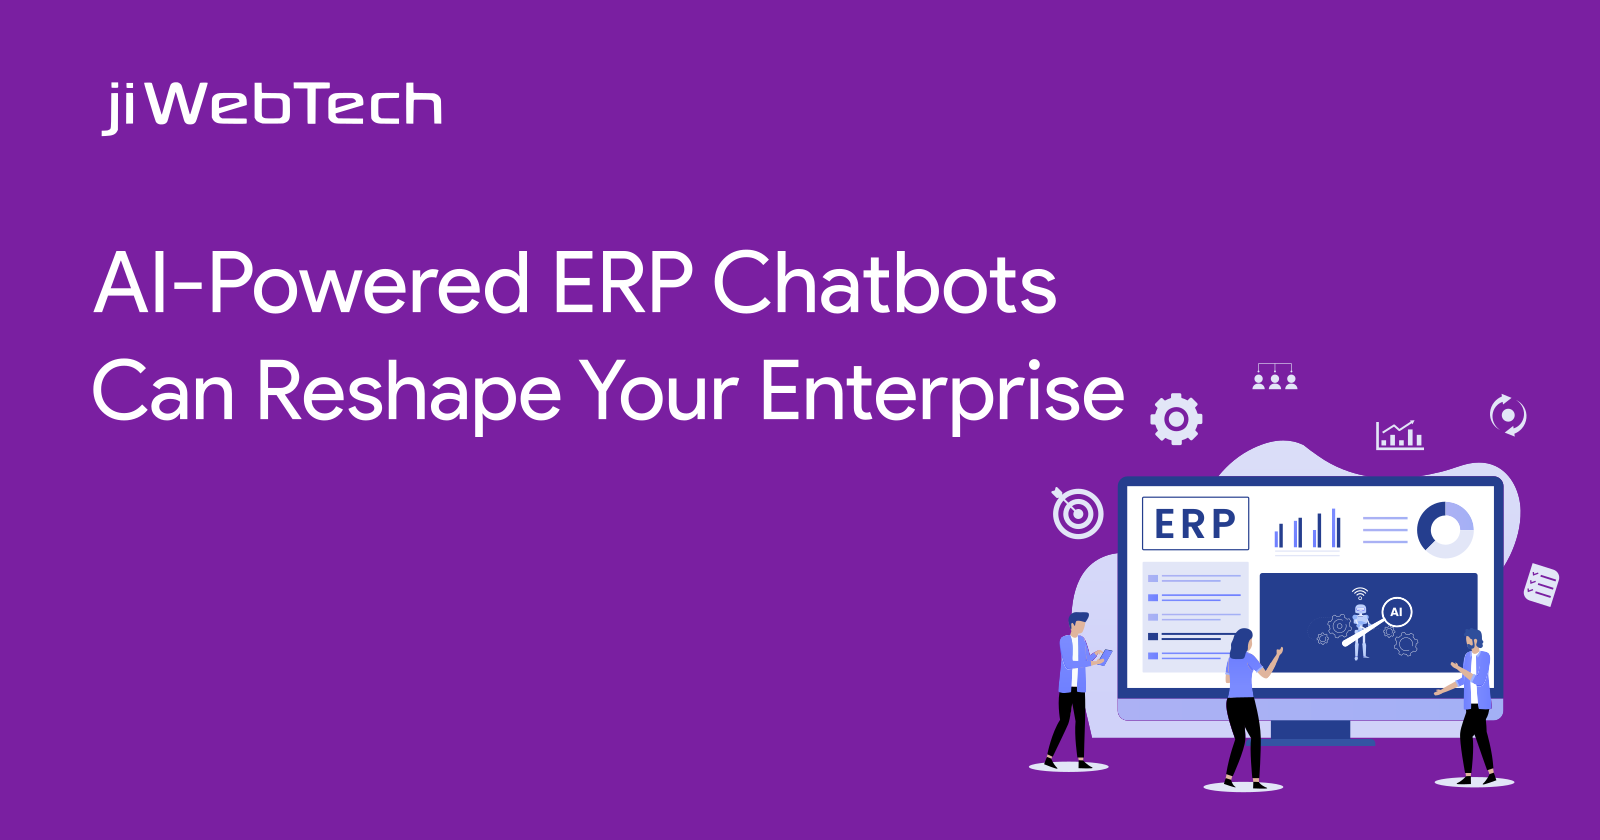 How AI-Powered ERP Chatbots Can Reshape Your Enterprise?